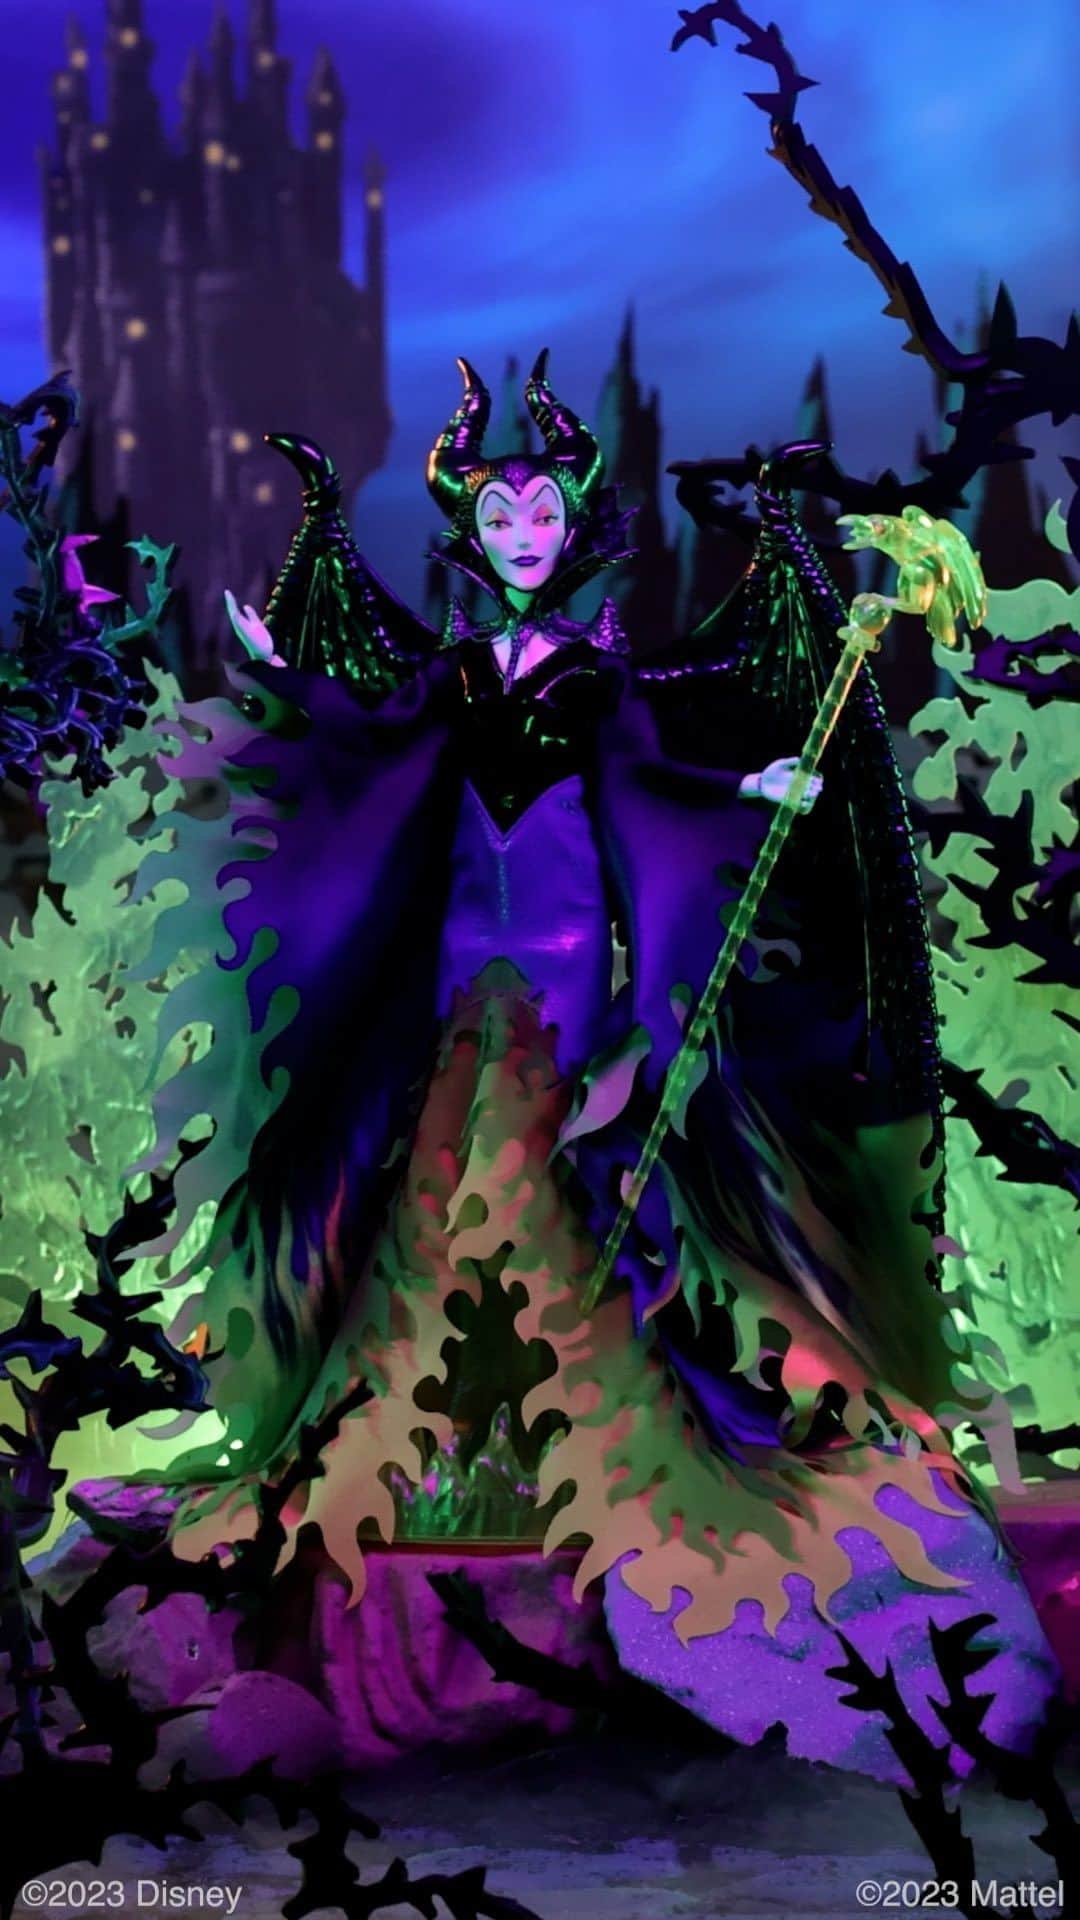 Mattelのインスタグラム：「Celebrate Disney’s 100 Years of Wonder with the launch of a new doll series.     Since the 1959 classic movie Disney’s Sleeping Beauty, Disney’s Maleficent has become one of their most wickedly loved Villains. This special collector edition captures her dramatic change from fiendish fairy into a fearless fire-breathing dragon. With majestic dragon wings and green flames engulfing her scaly black and purple gown, Maleficent is depicted in mid-transformation.   Join our Lead Product Designer and other guests for a special livestream today, 4/27, at 12 PM PT on Mattel Creations.   Grab the first Darkness Descends Series doll on 4/28 at 9 AM PT on MattelCreations.com.   #MattelCreations #Disney100」